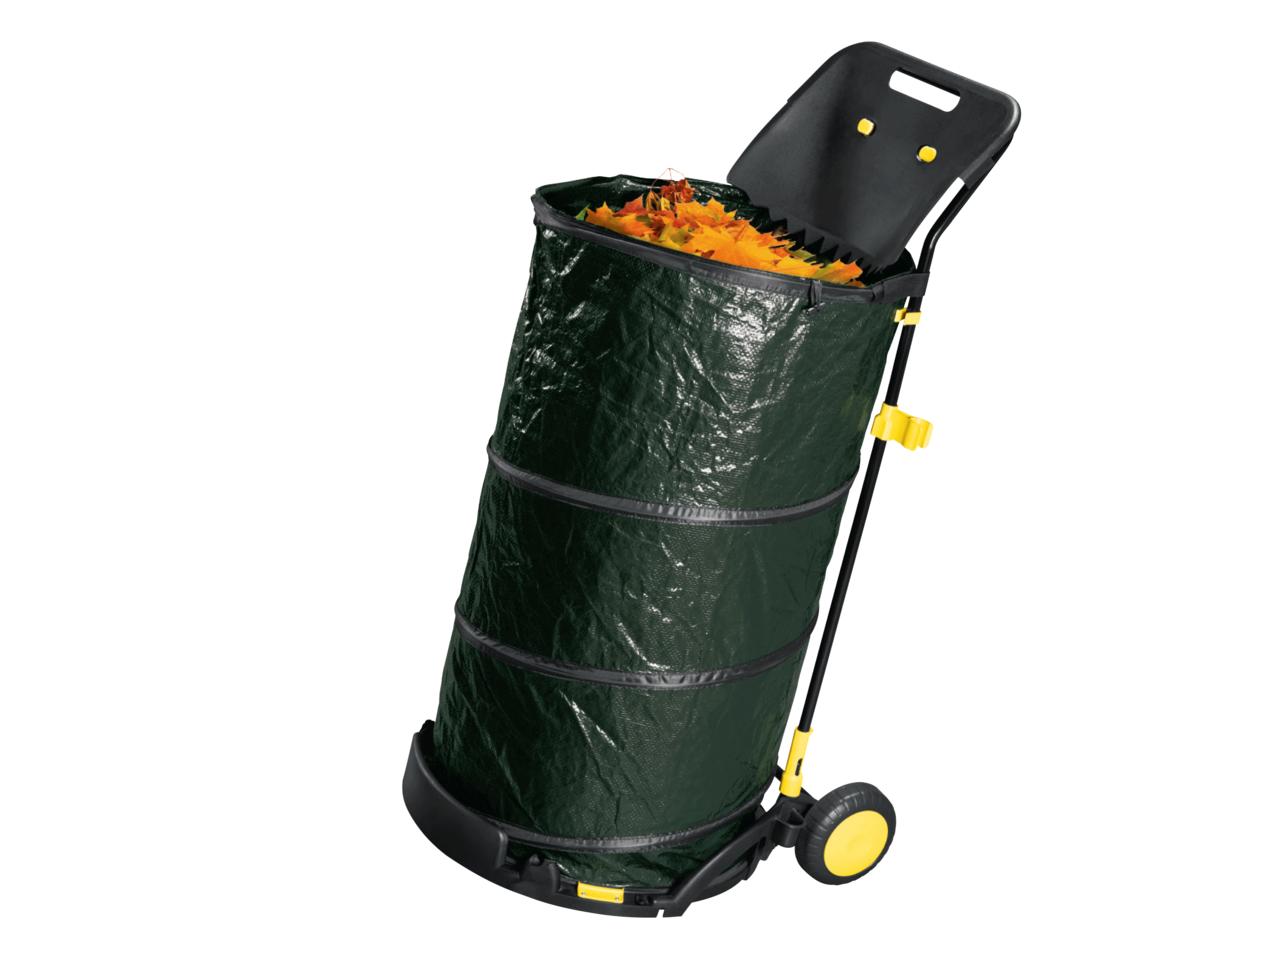 FLORABEST(R) Folding Trolley with Collapsible Garden Bin